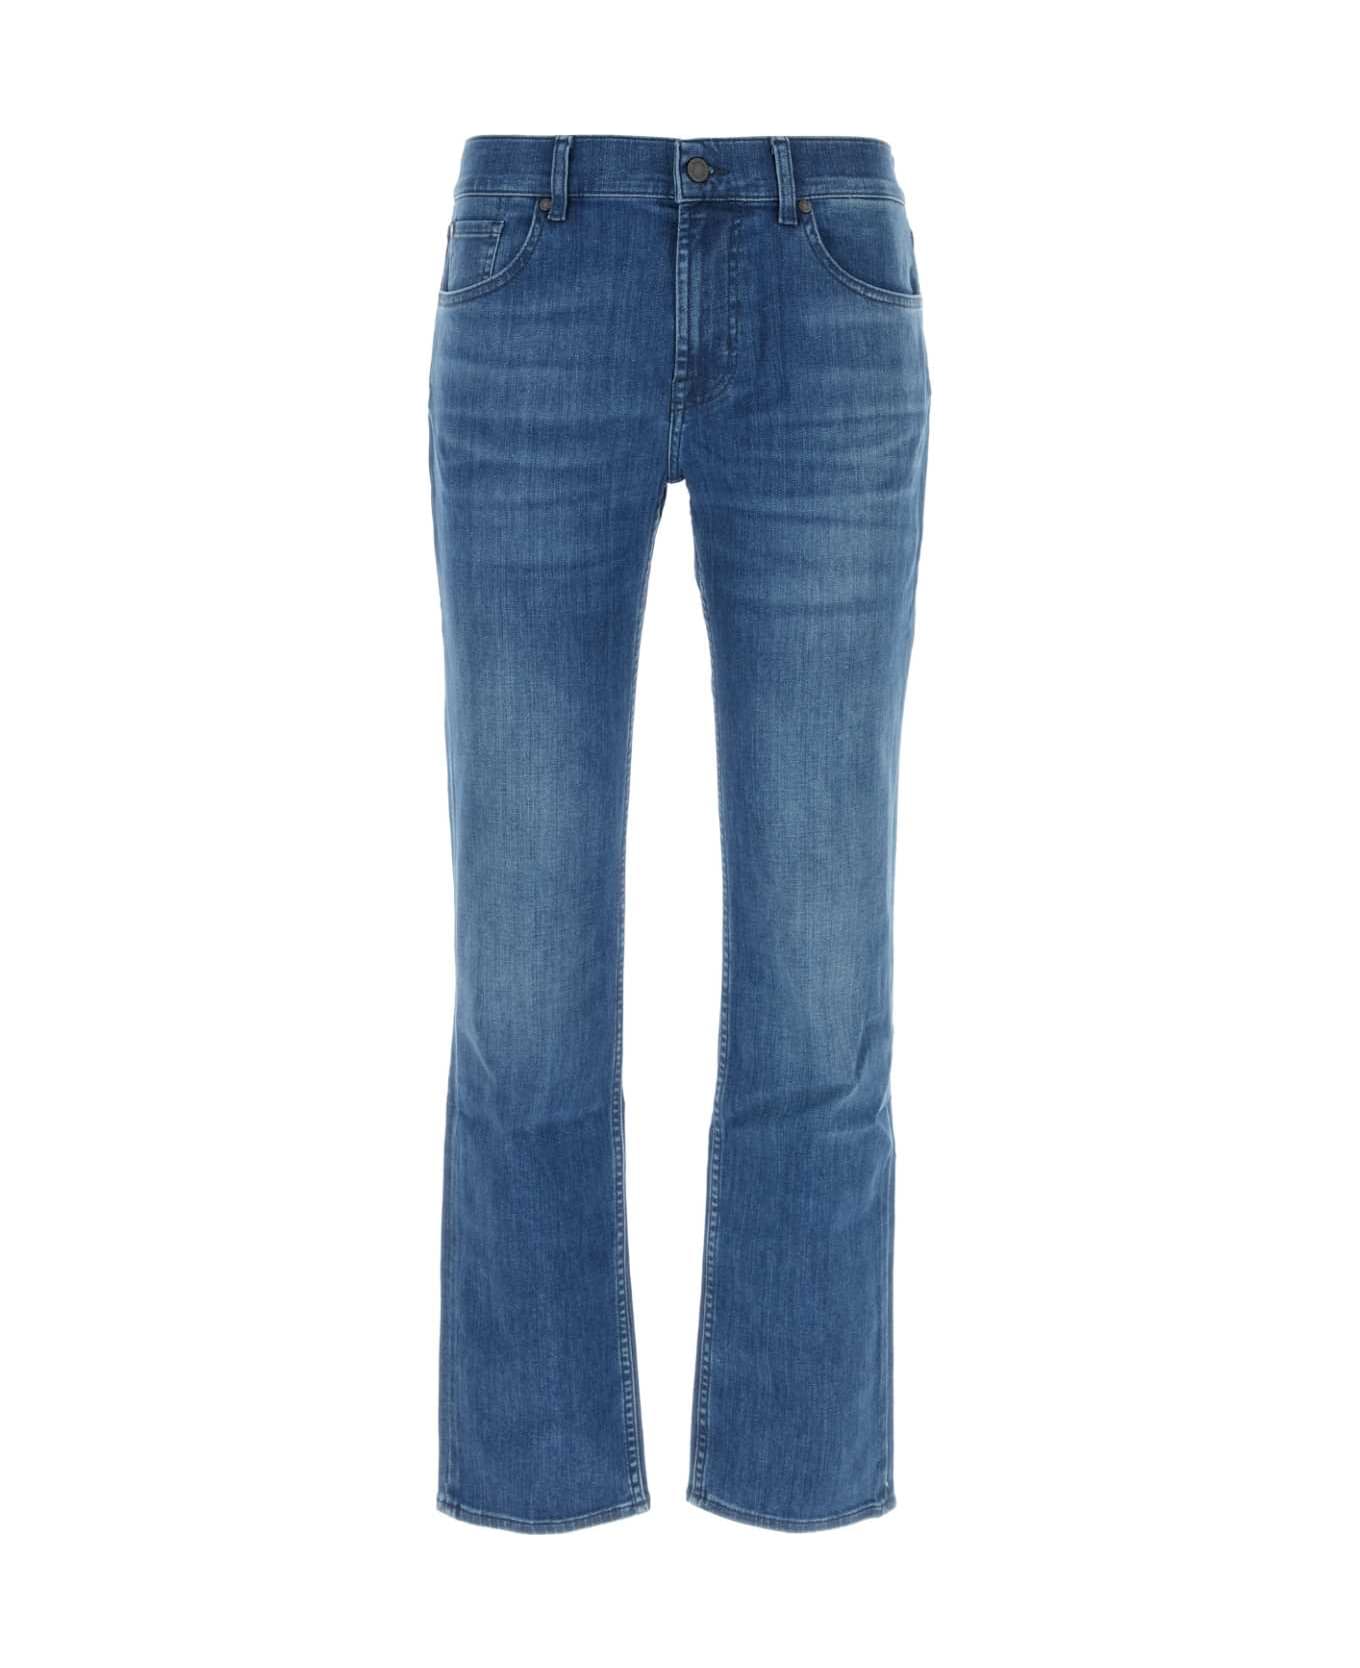 7 For All Mankind Stretch Denim Luxe Performance Jeans - MIDBLUE